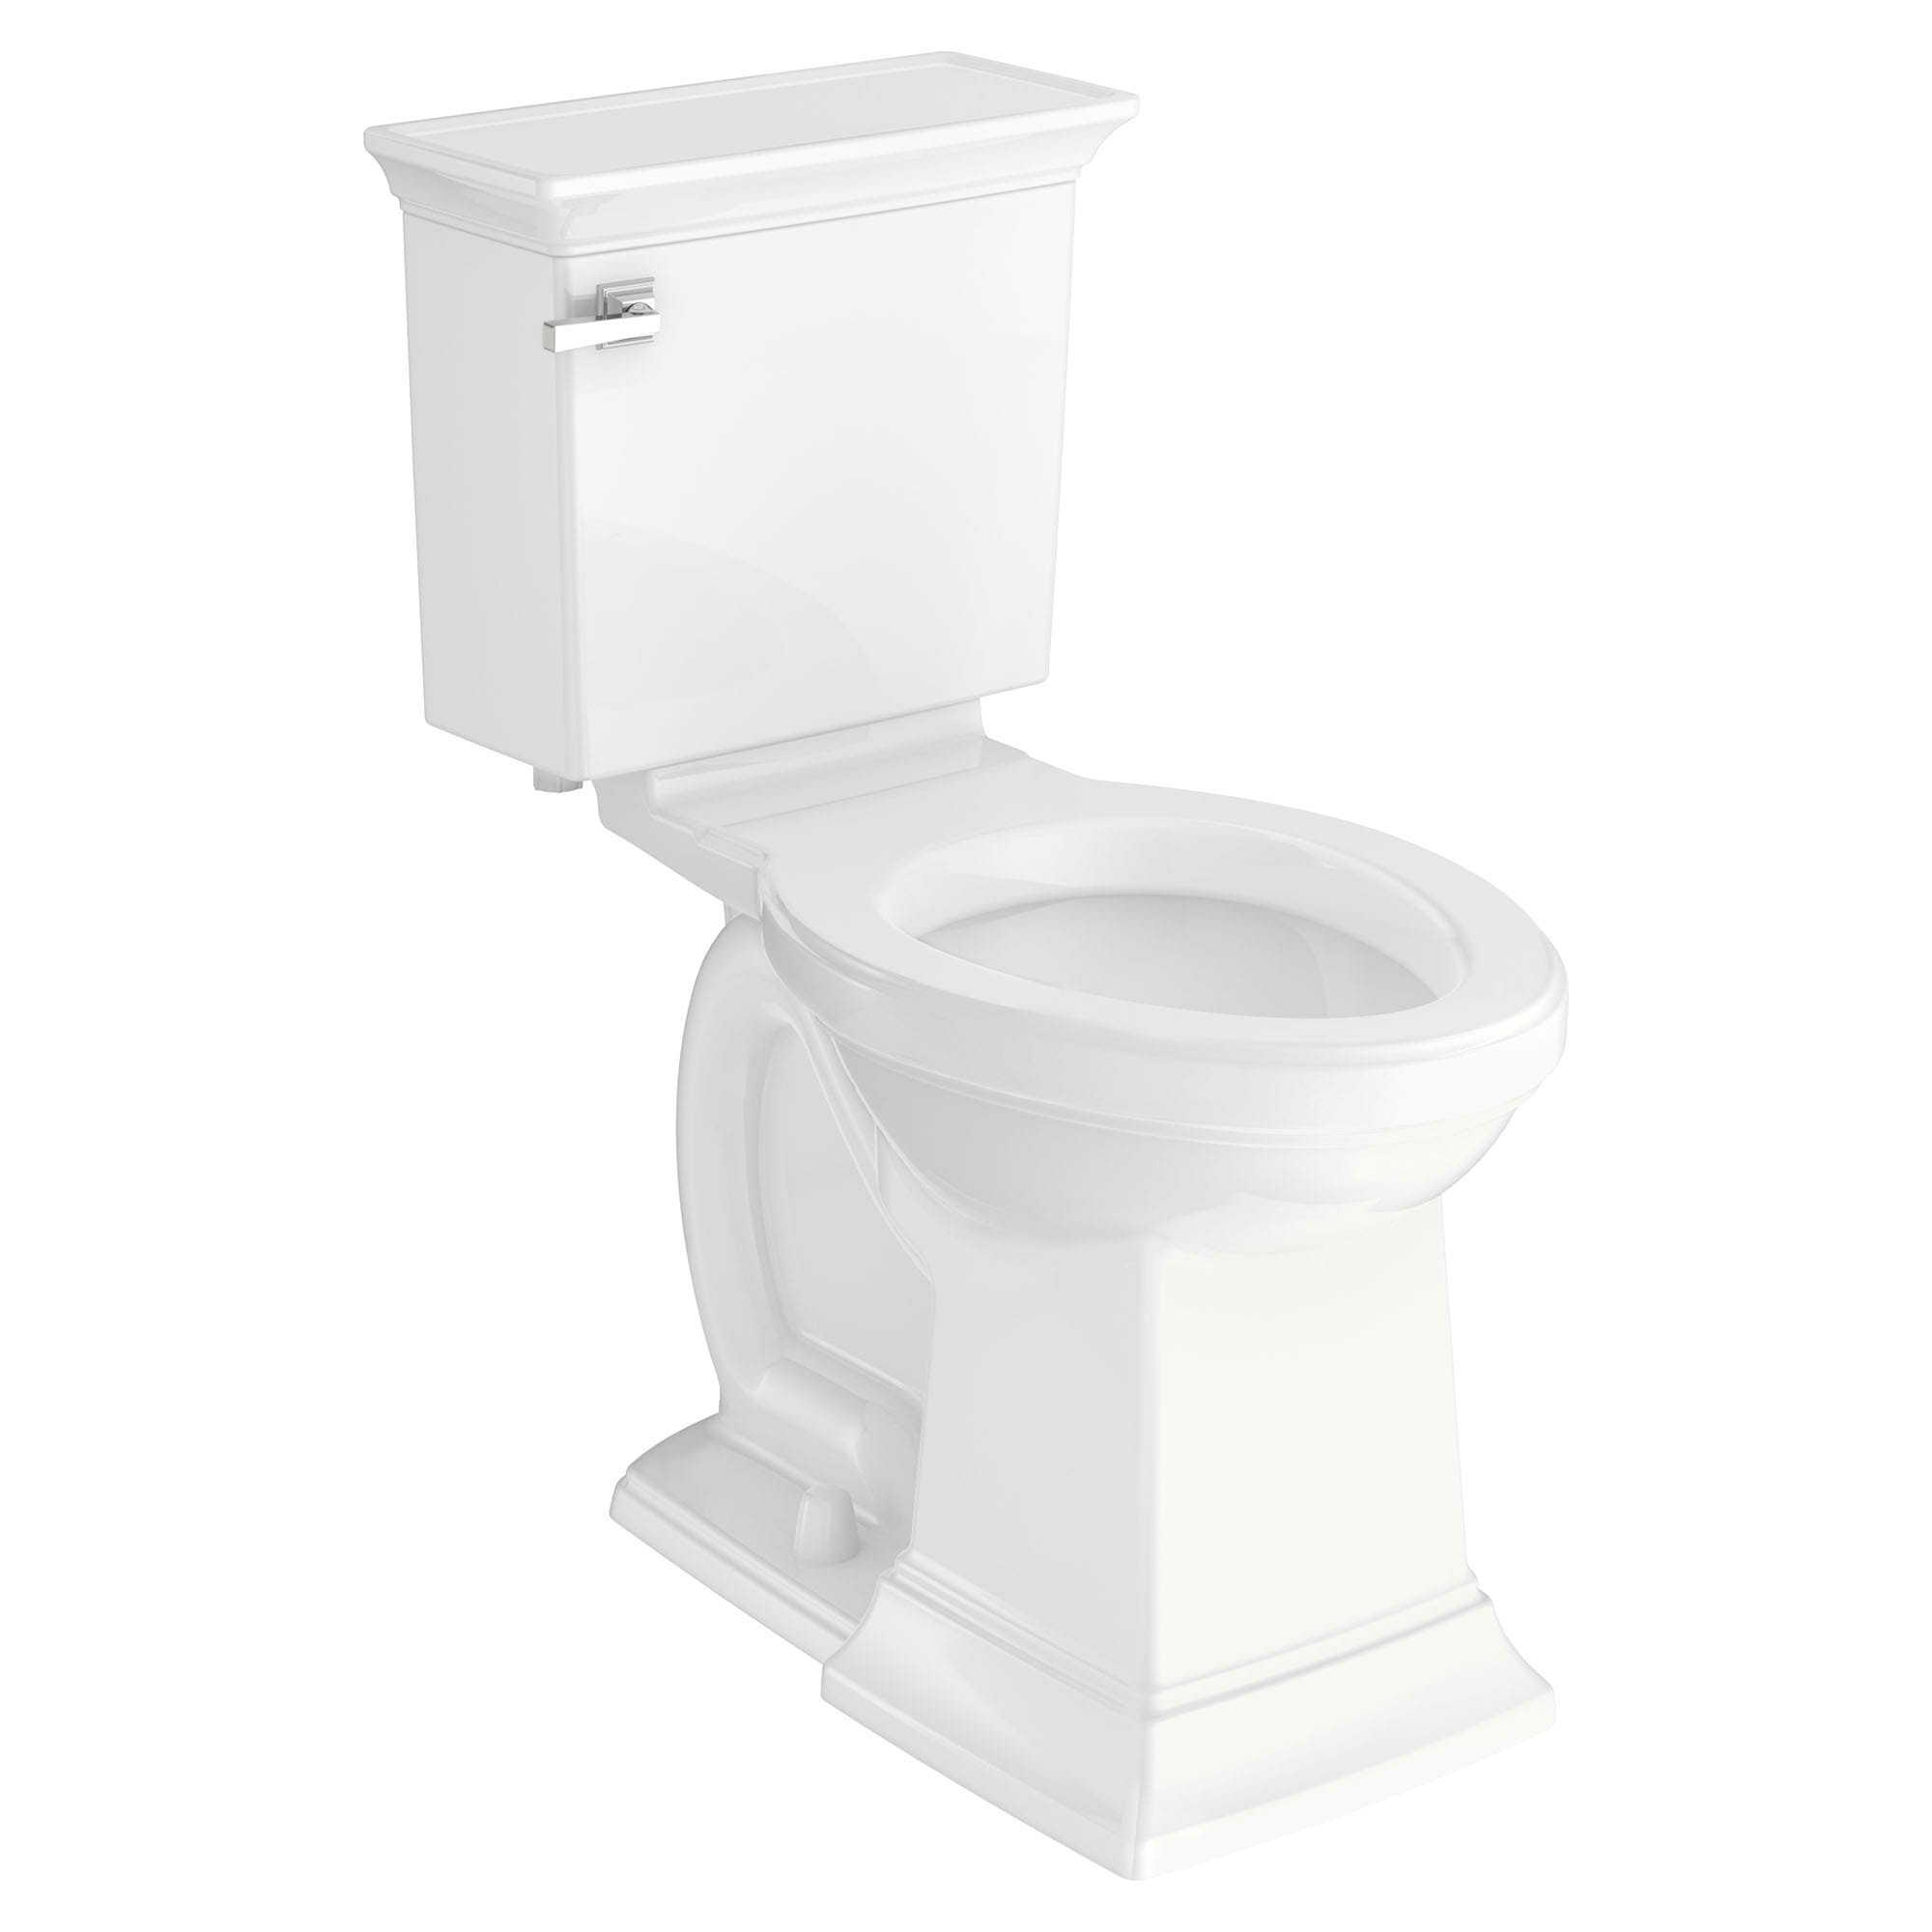 Town Square S Two Piece 128 gpf 48 Lpf Chair Height Elongated Toilet Less Seat WHITE